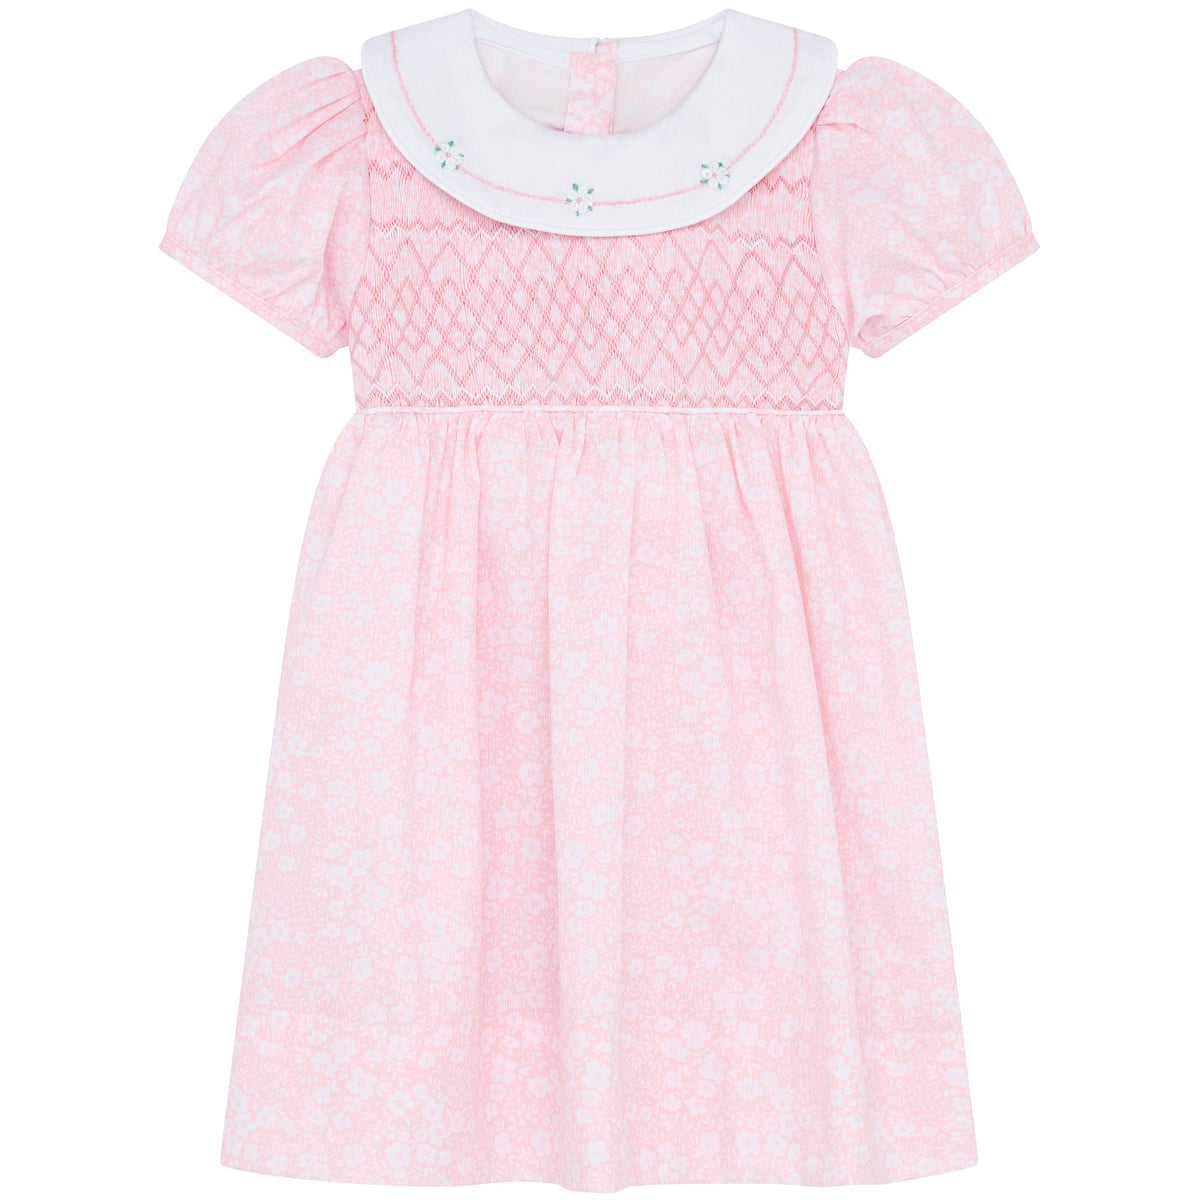 Charlotte Hand Smocked Embroidered Baby Dress Pink | Holly Hastie London